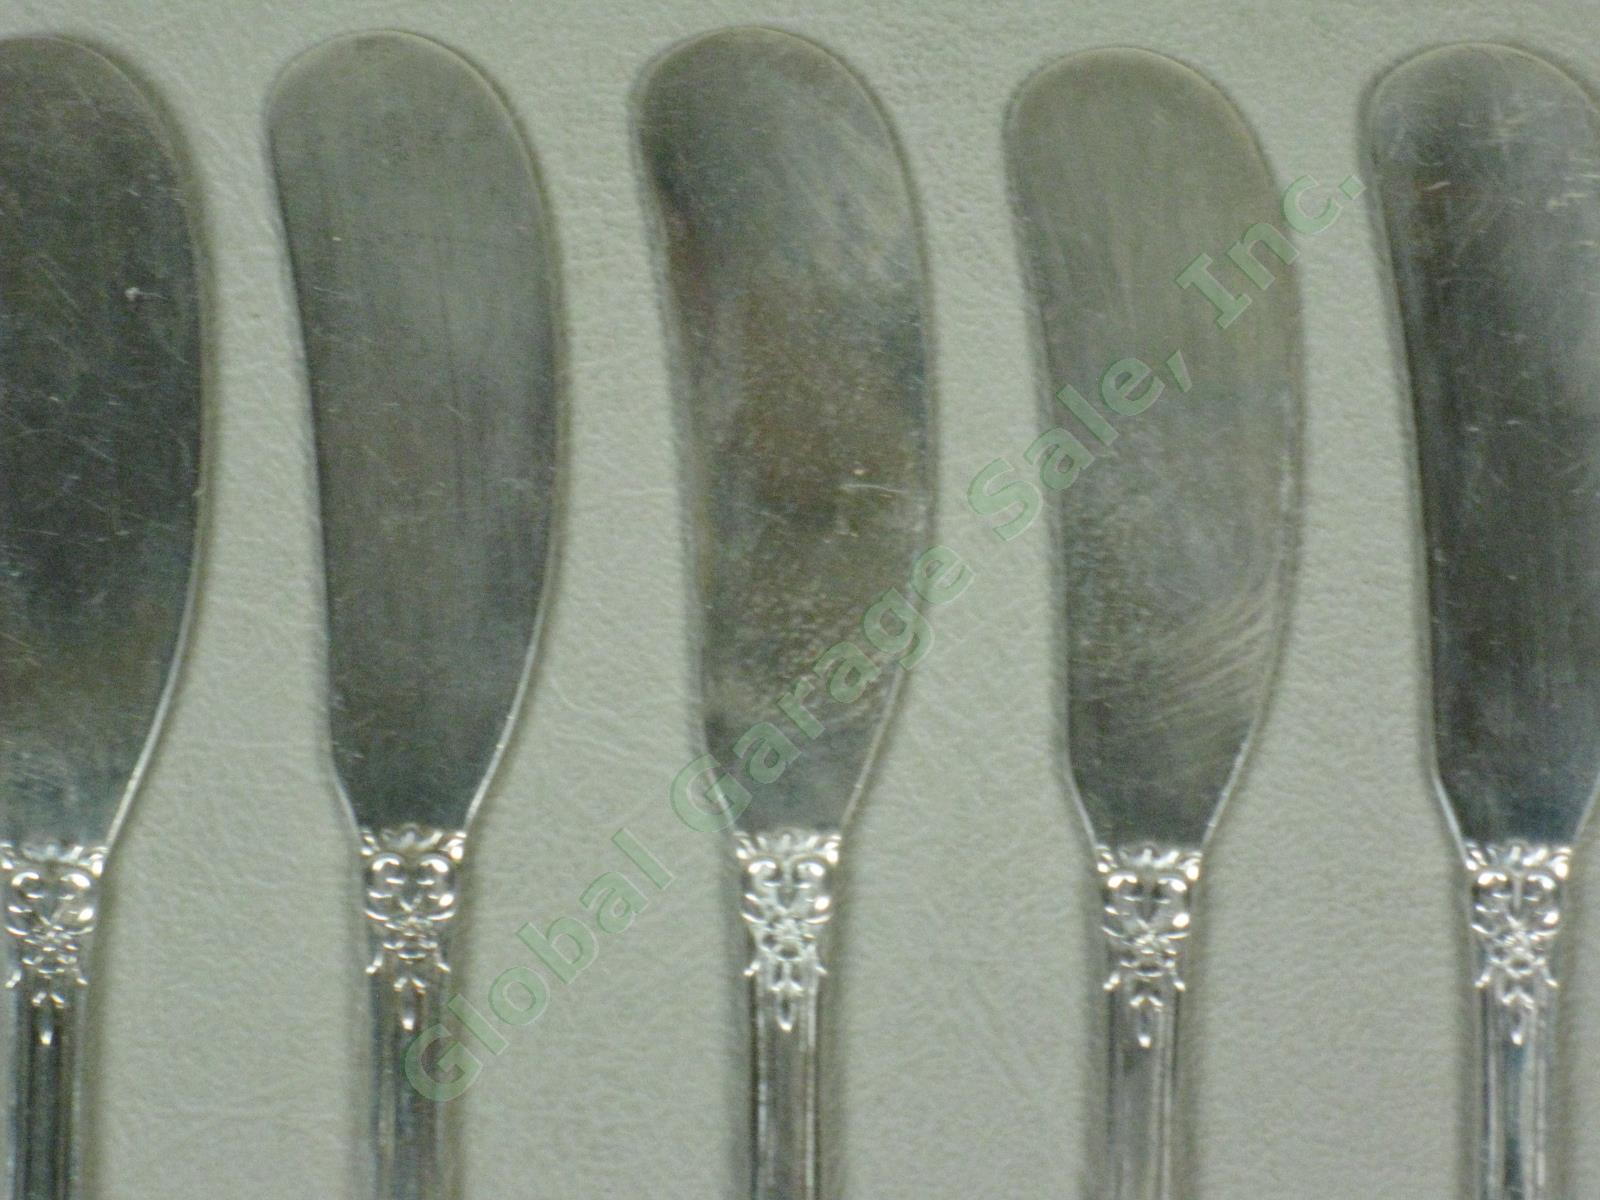 7 State House Inaugural Sterling Silver Butter Knives Silverware Flatware Set NR 1